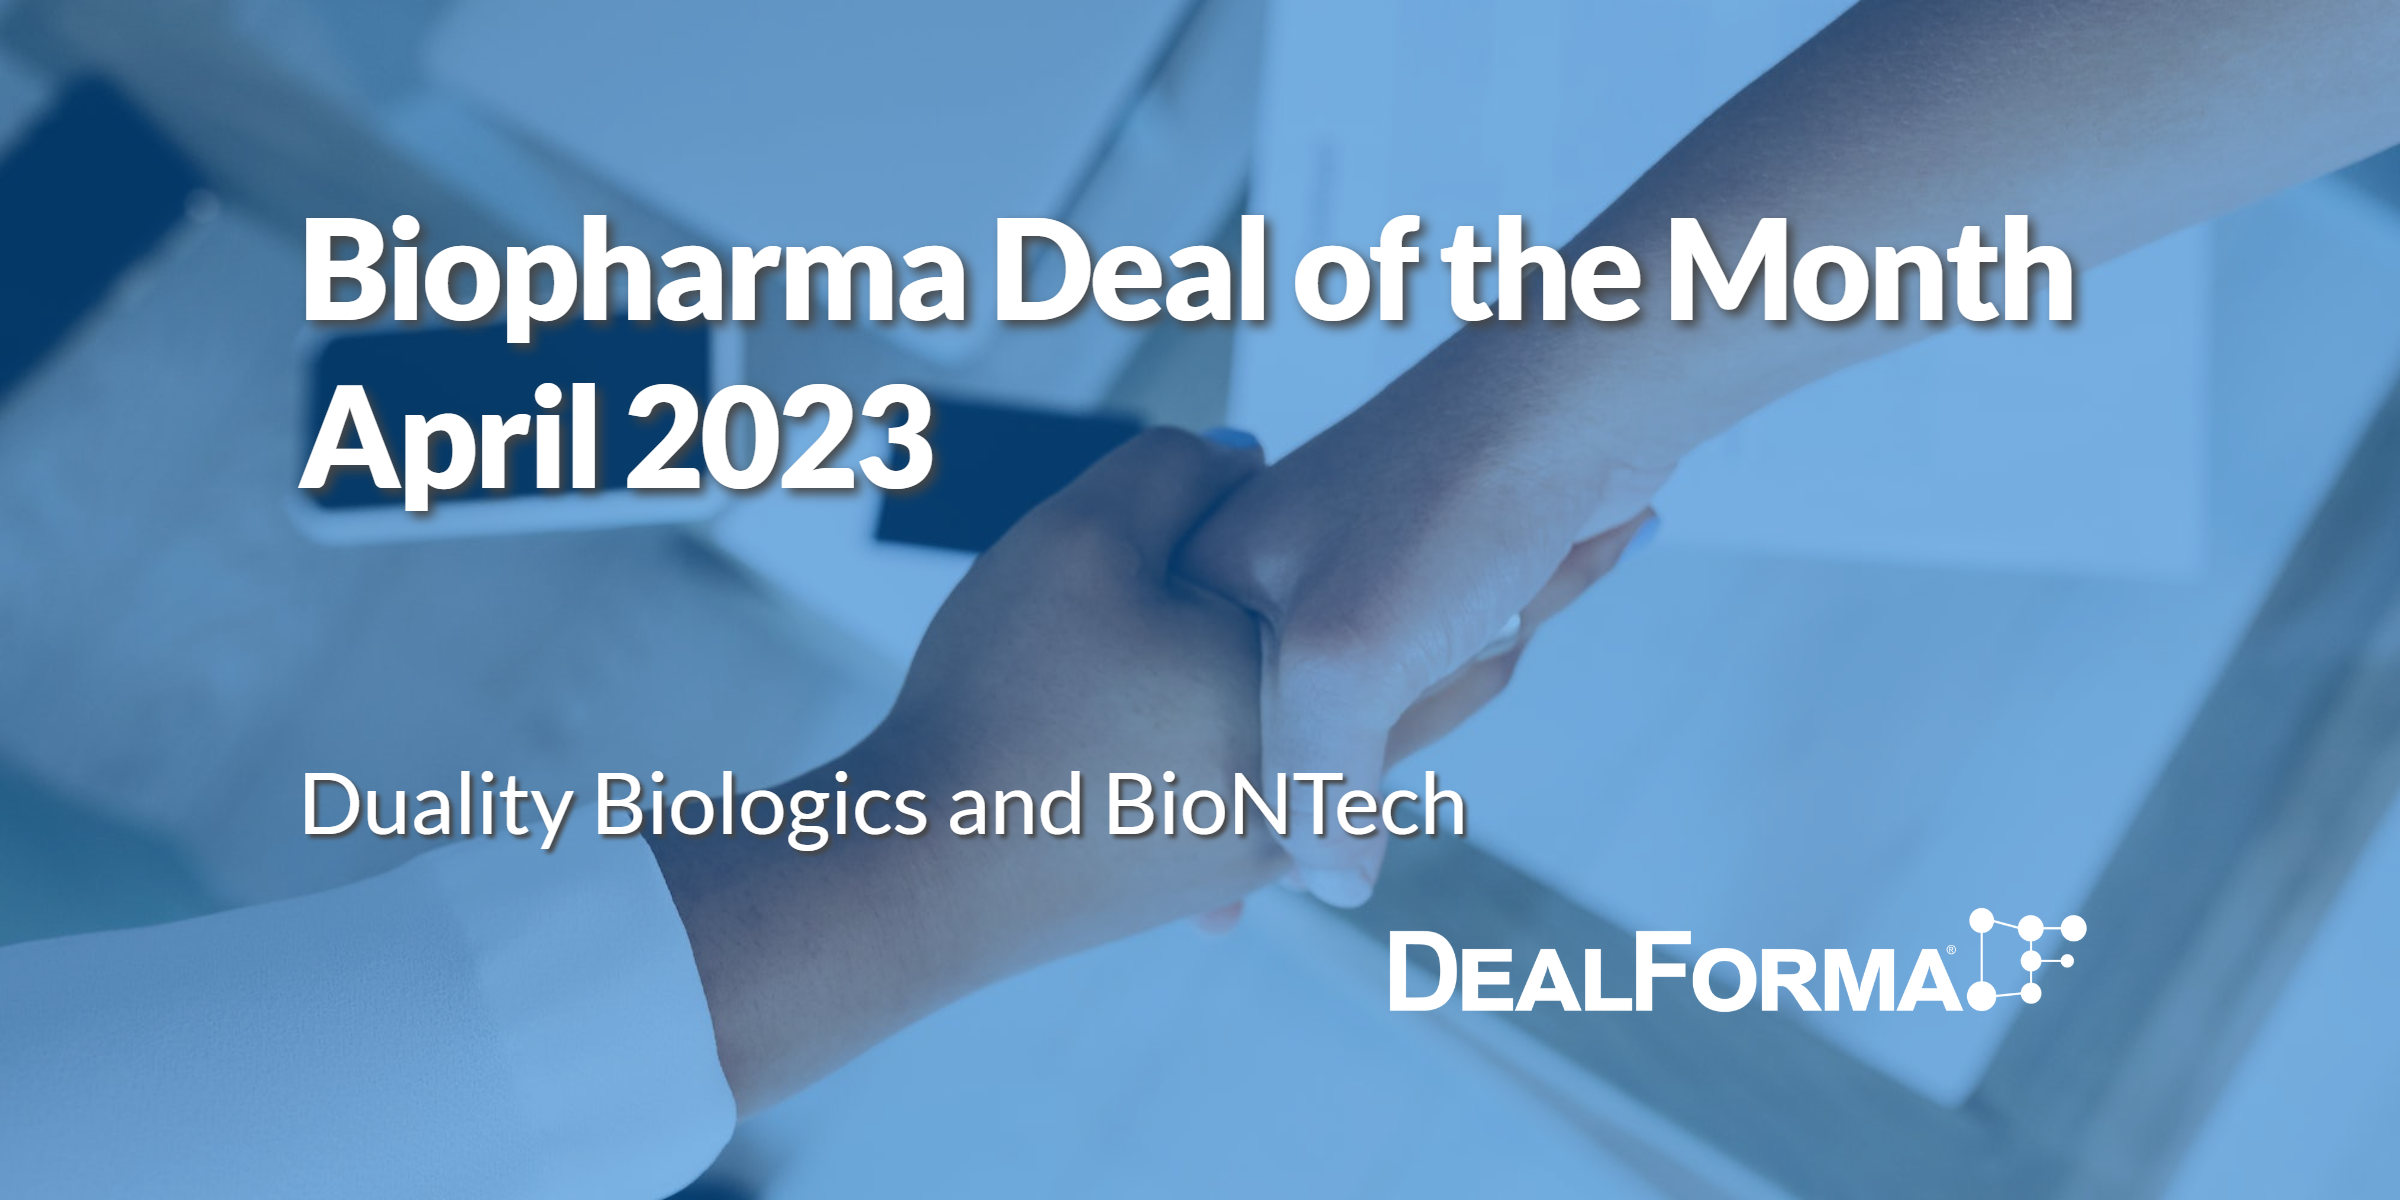 Biopharma Deal of the Month April 2023. Duality Biologics and BioNTech